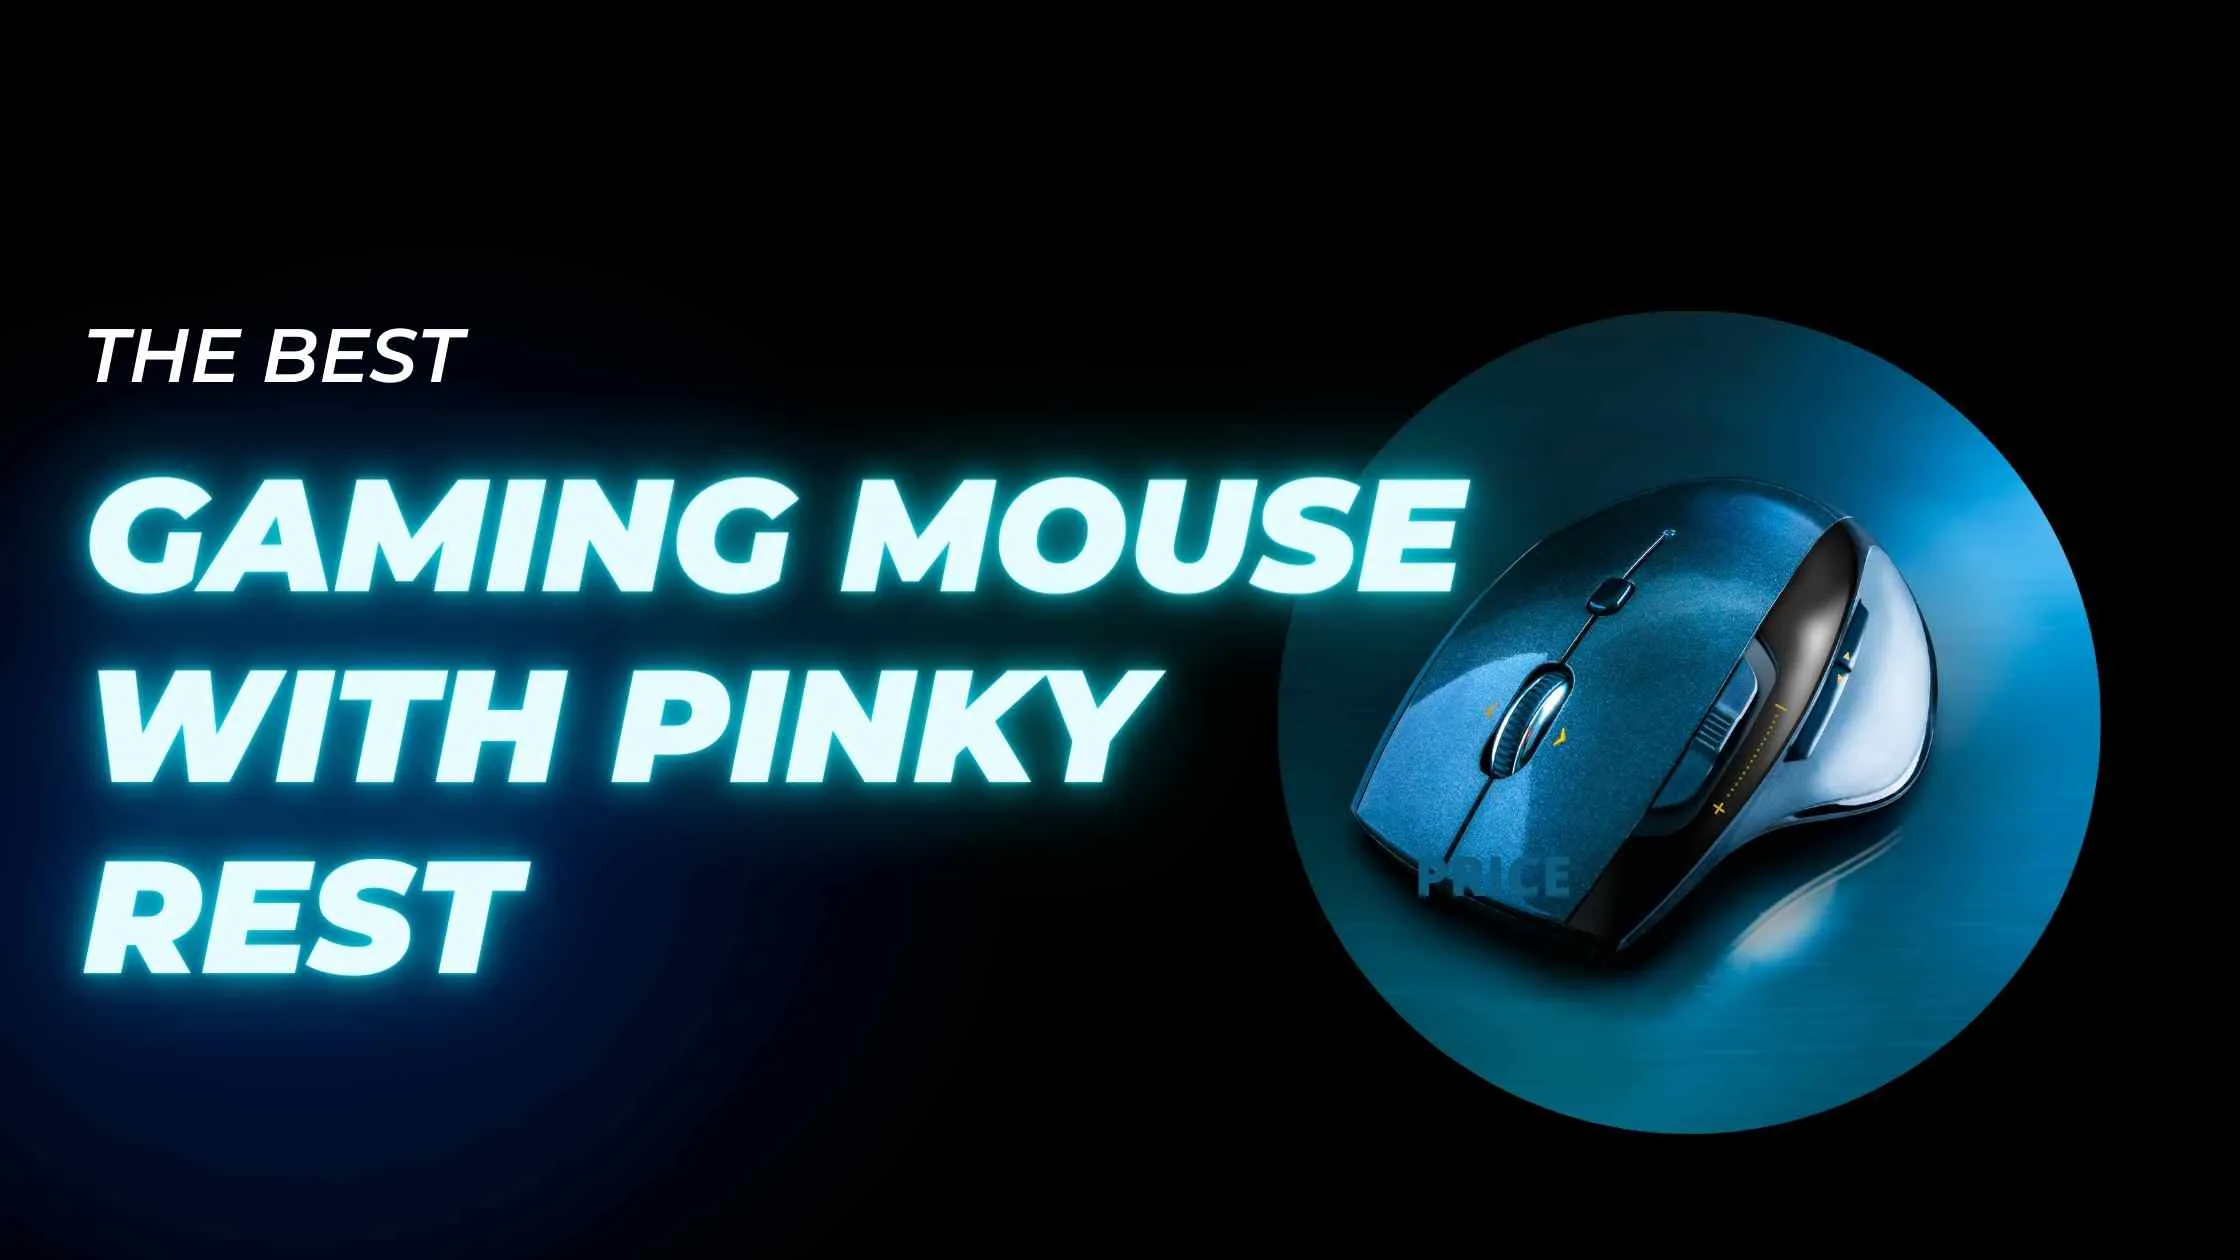 Get the coolest Gaming Mouse with Pinky Rest in 2023